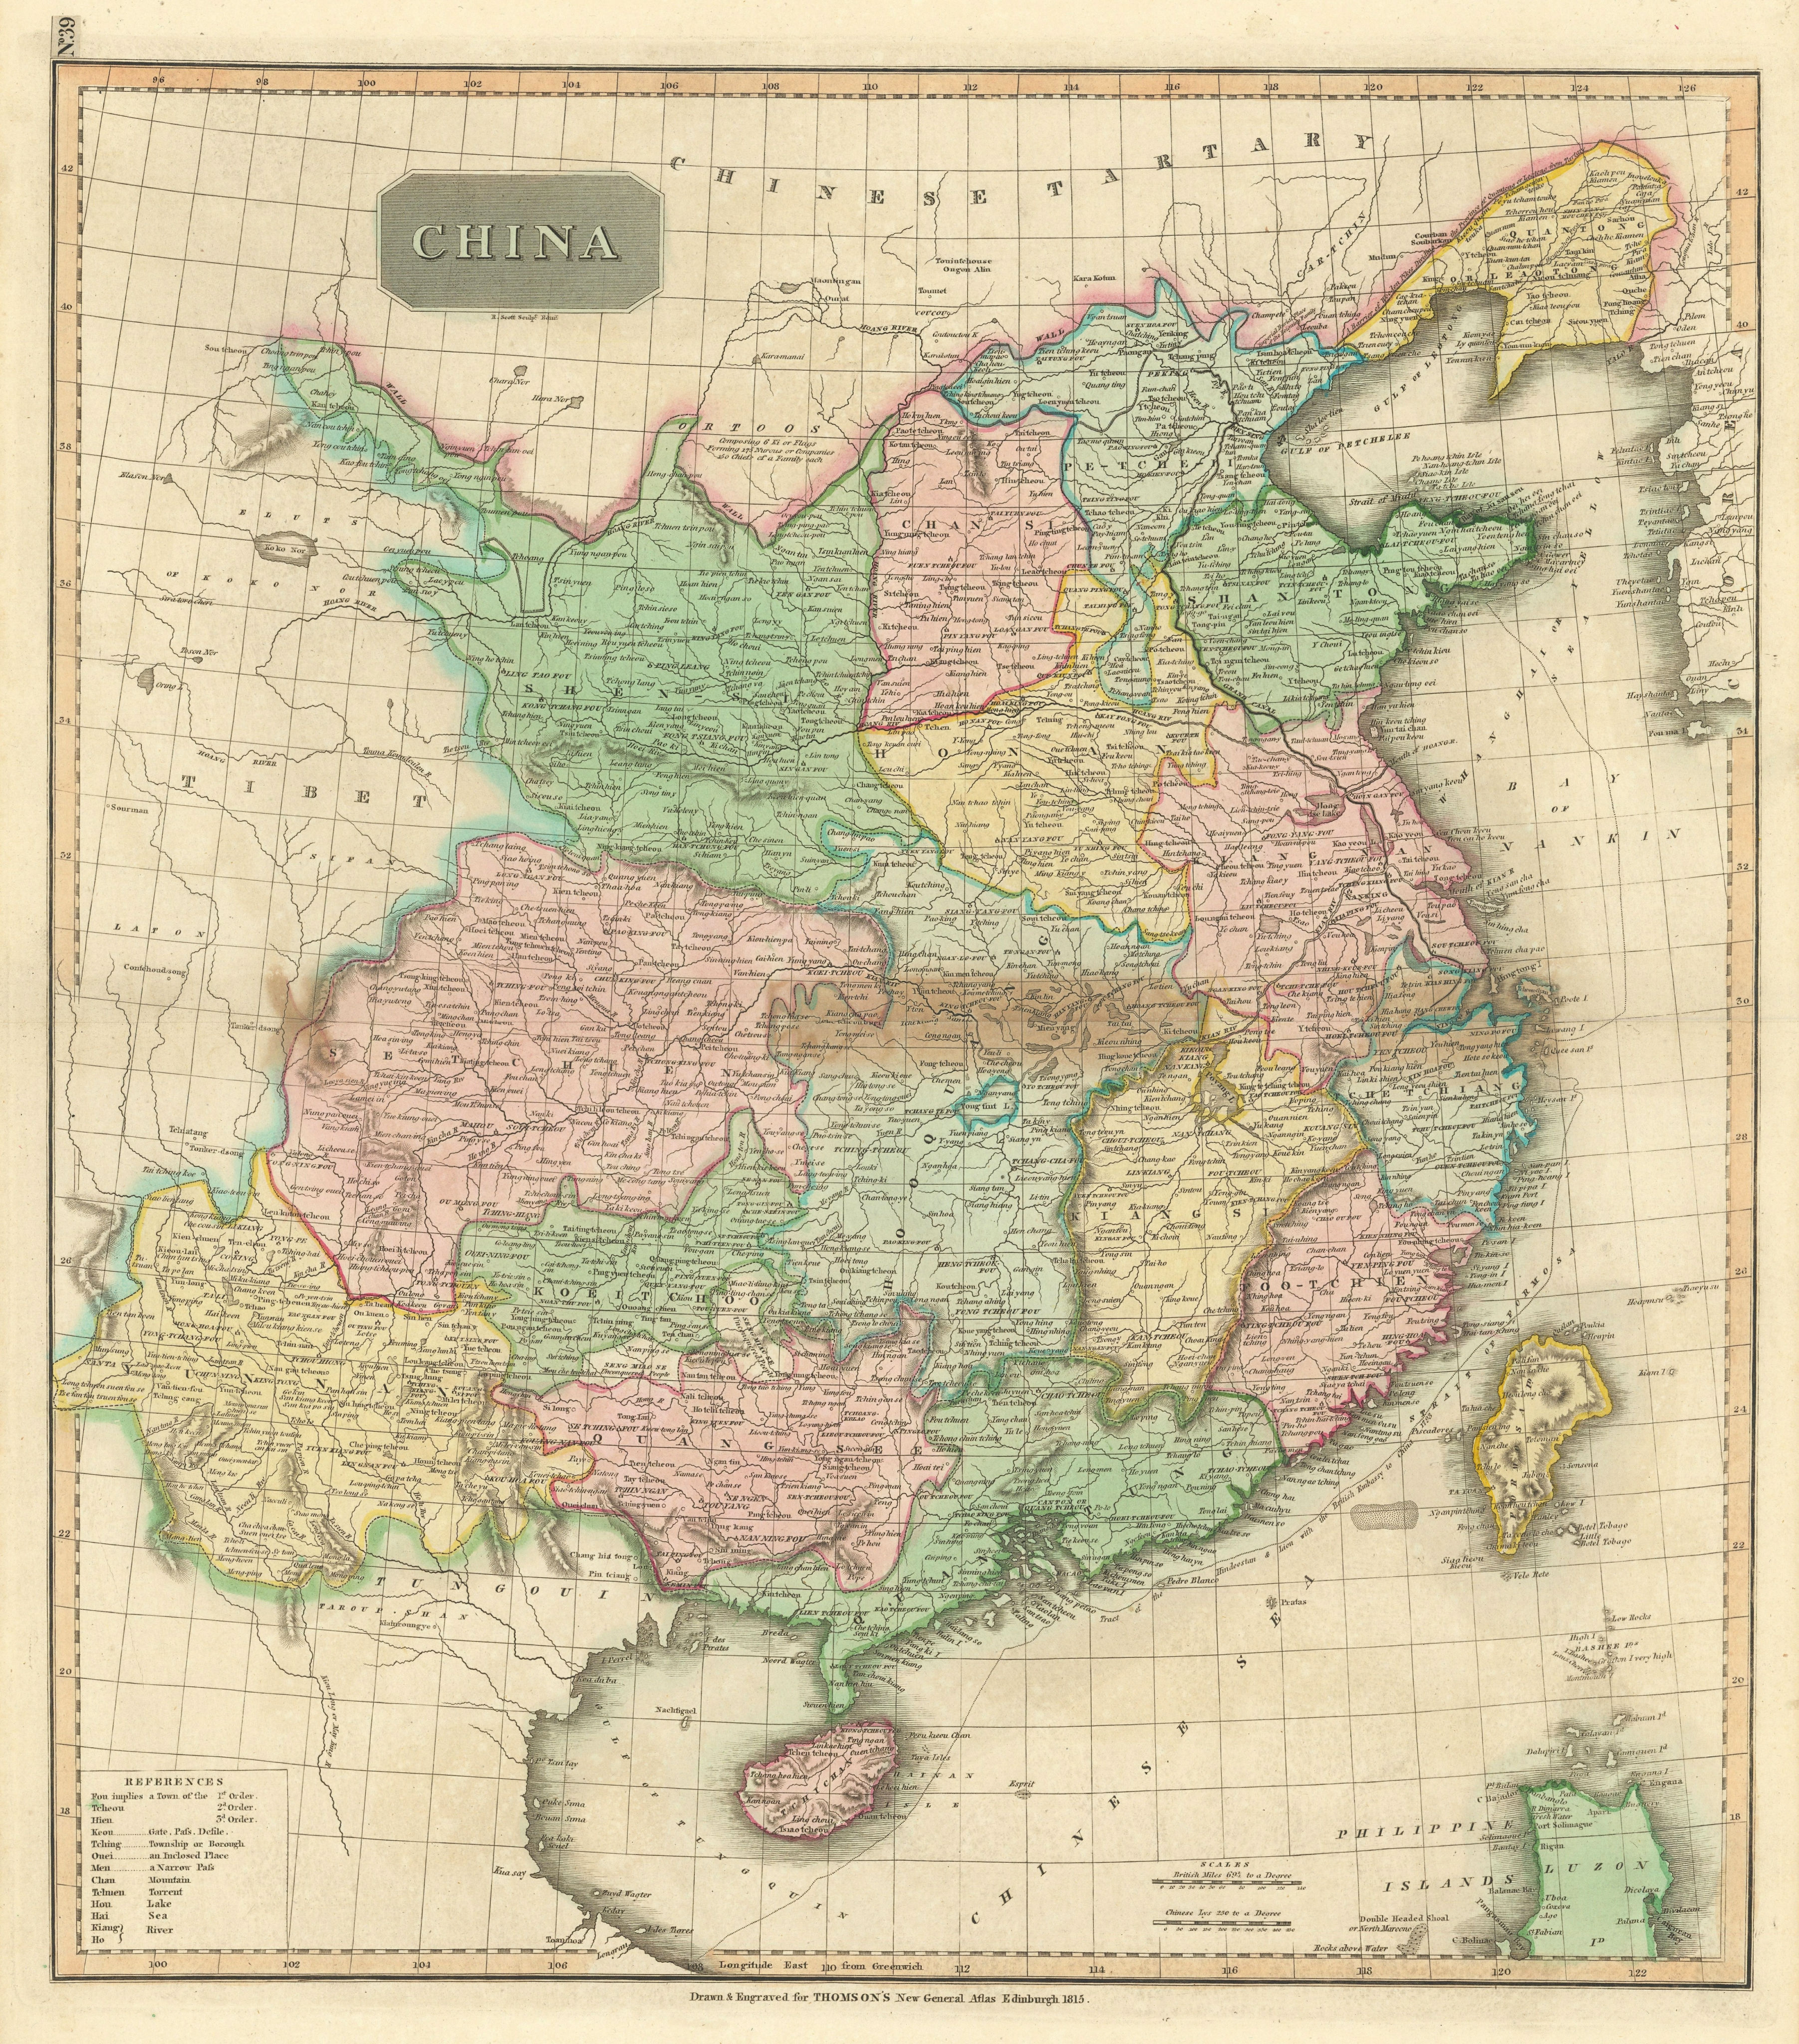 Associate Product "China" showing route of George Macartney's Embassy in 1793. THOMSON 1817 map